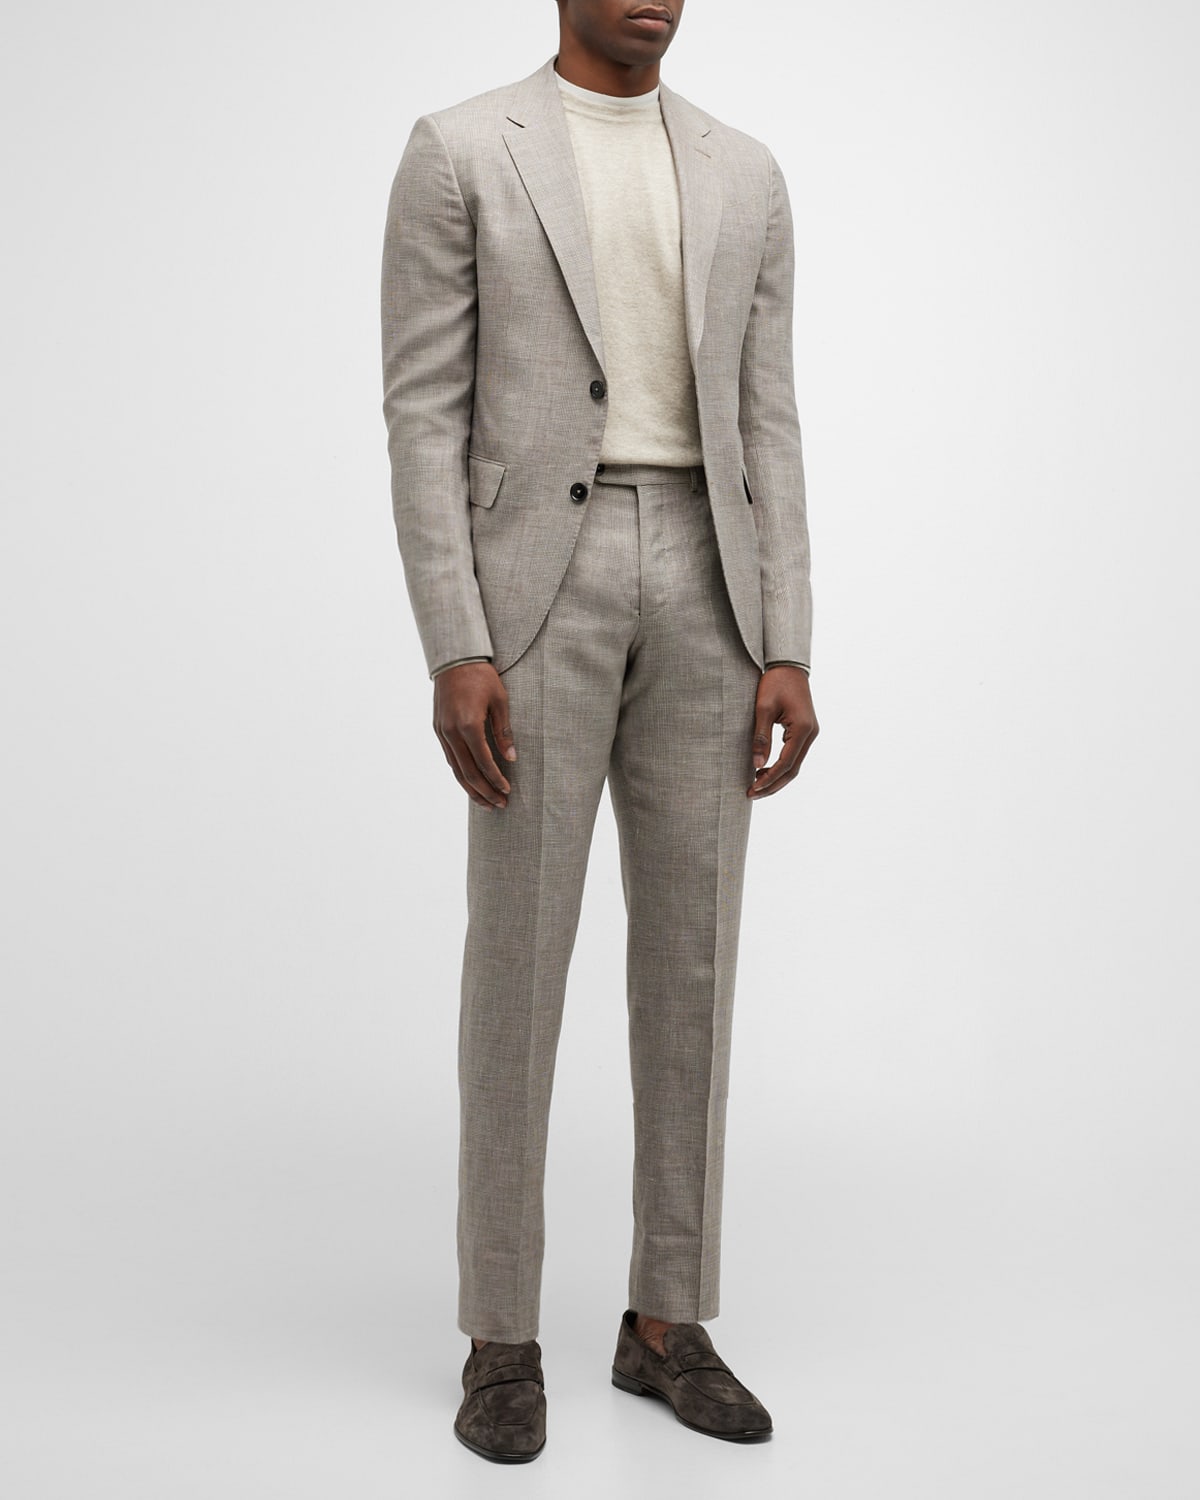 Zegna Men's Prince Of Wales Crossover Suit In Md Bge Ck